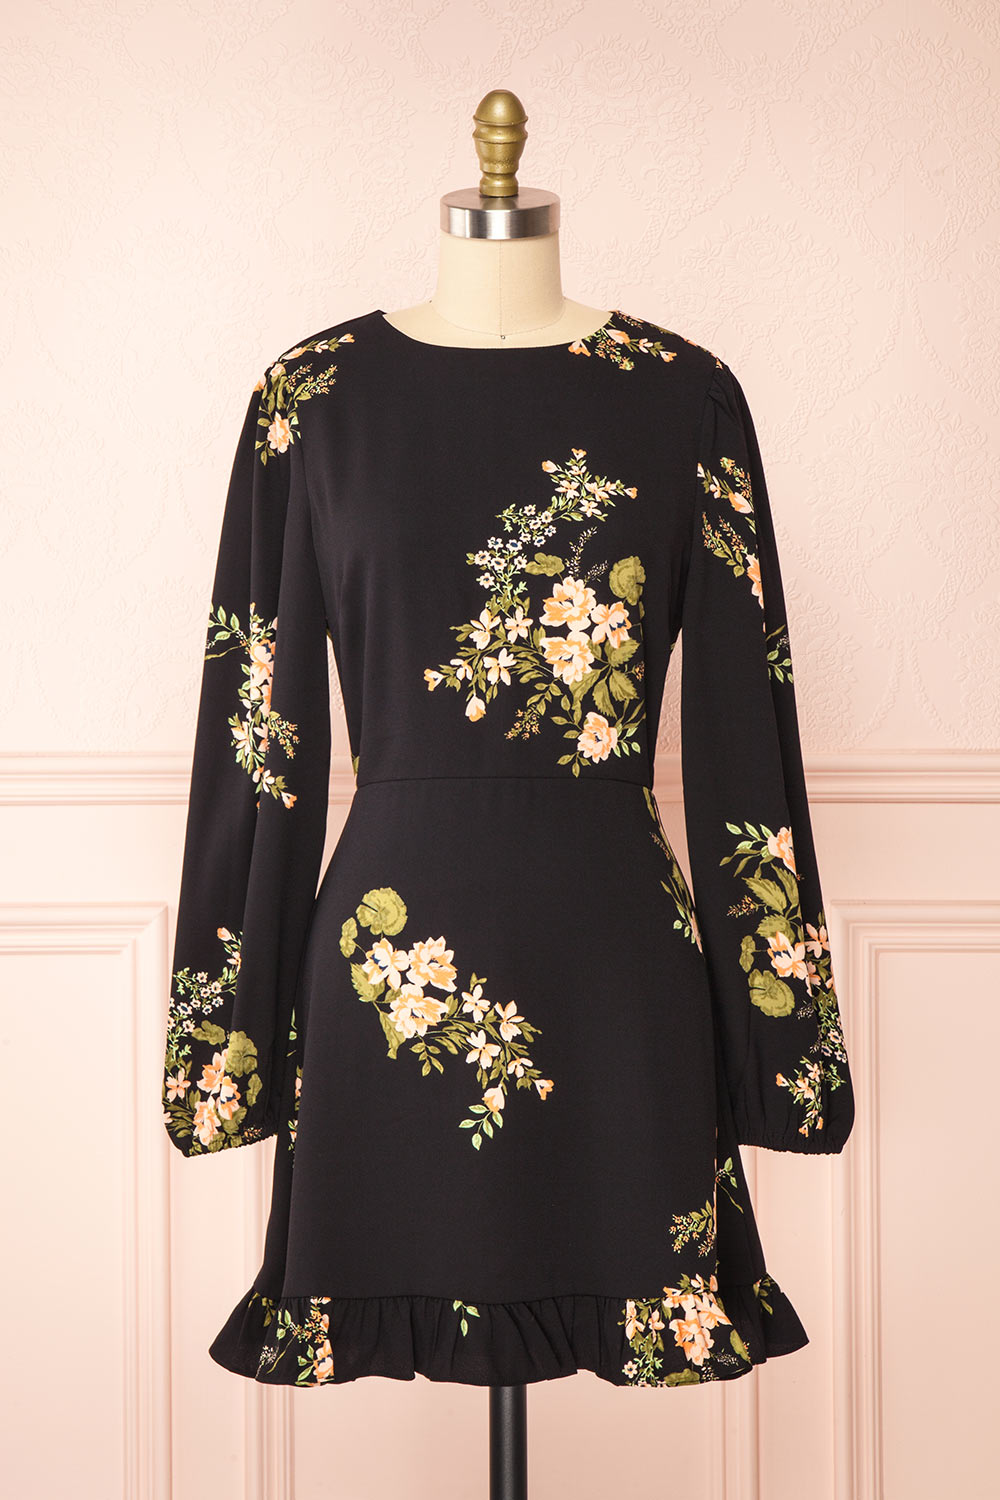 Blomey Black Short Floral Dress w/ Long Sleeves | Boutique 1861 front view